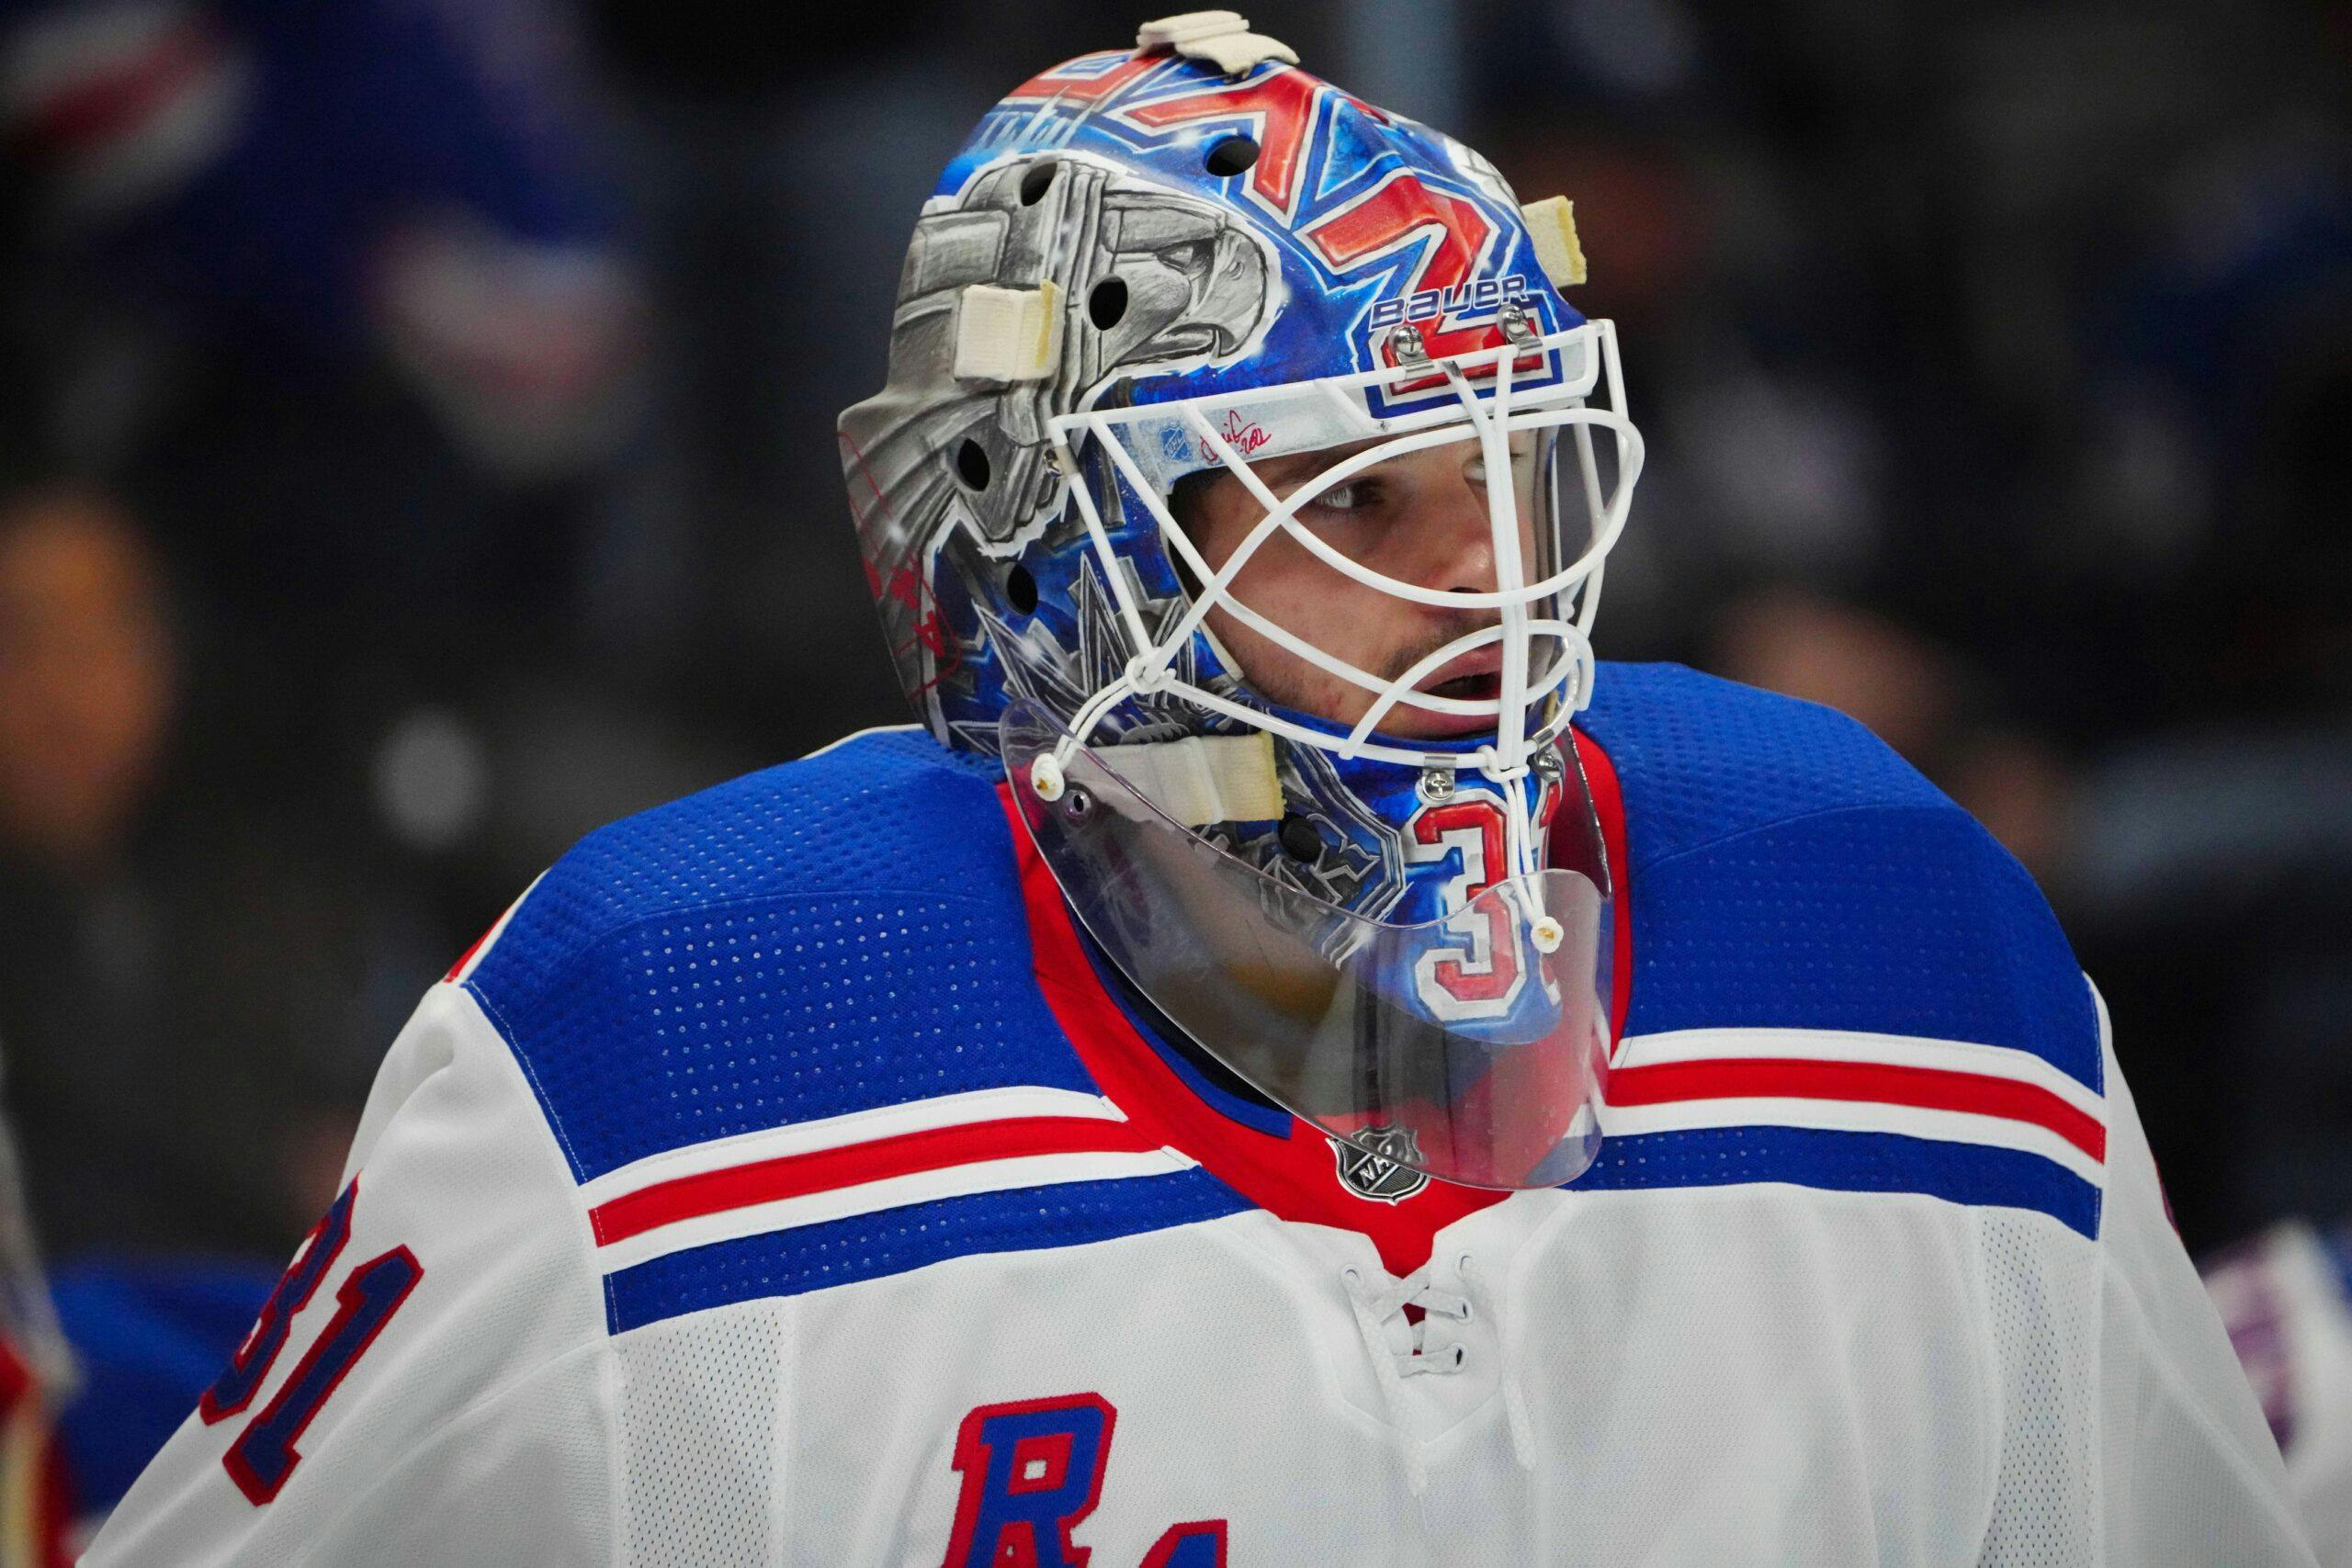 Finally, Igor Shesterkin has returned to form with the New York Rangers